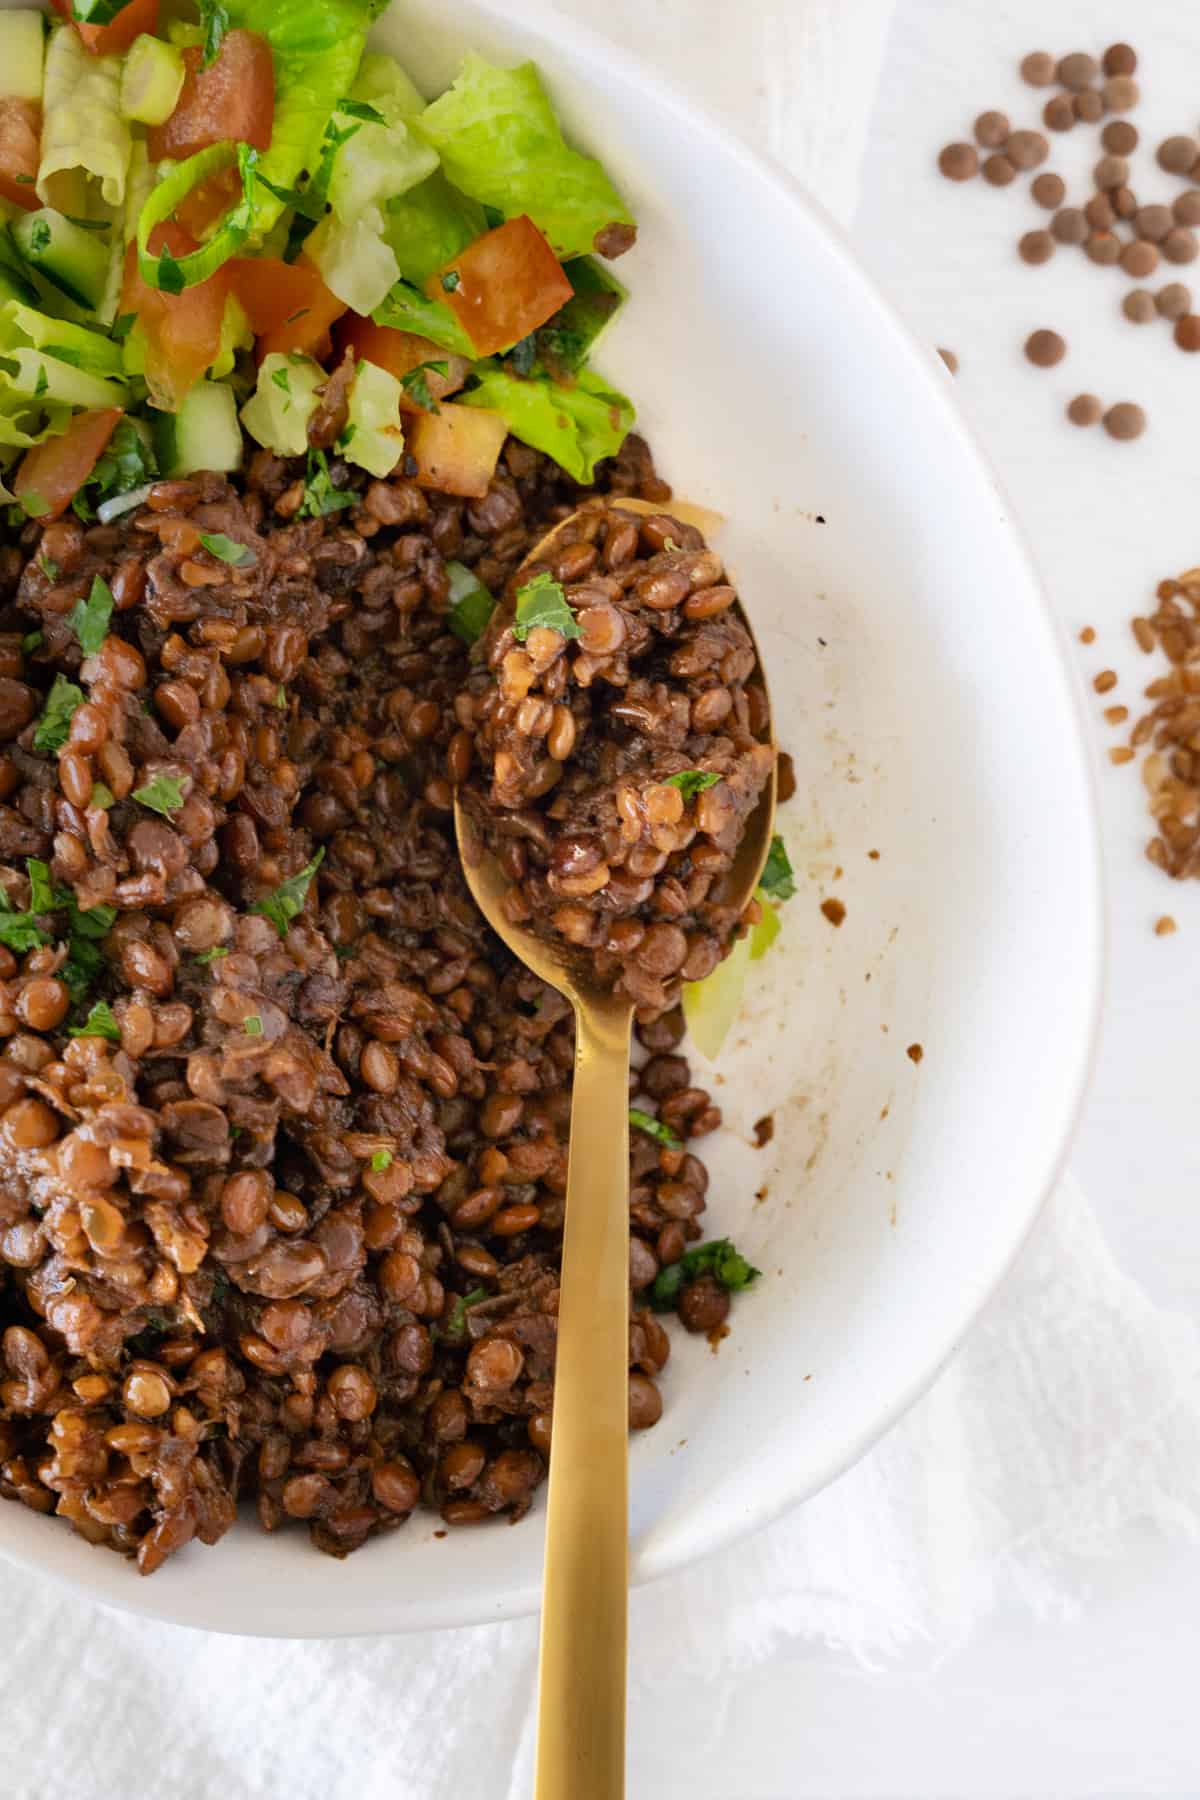 a spoonful of cooked lentils and bulgur called mujadara hamra in a bowl